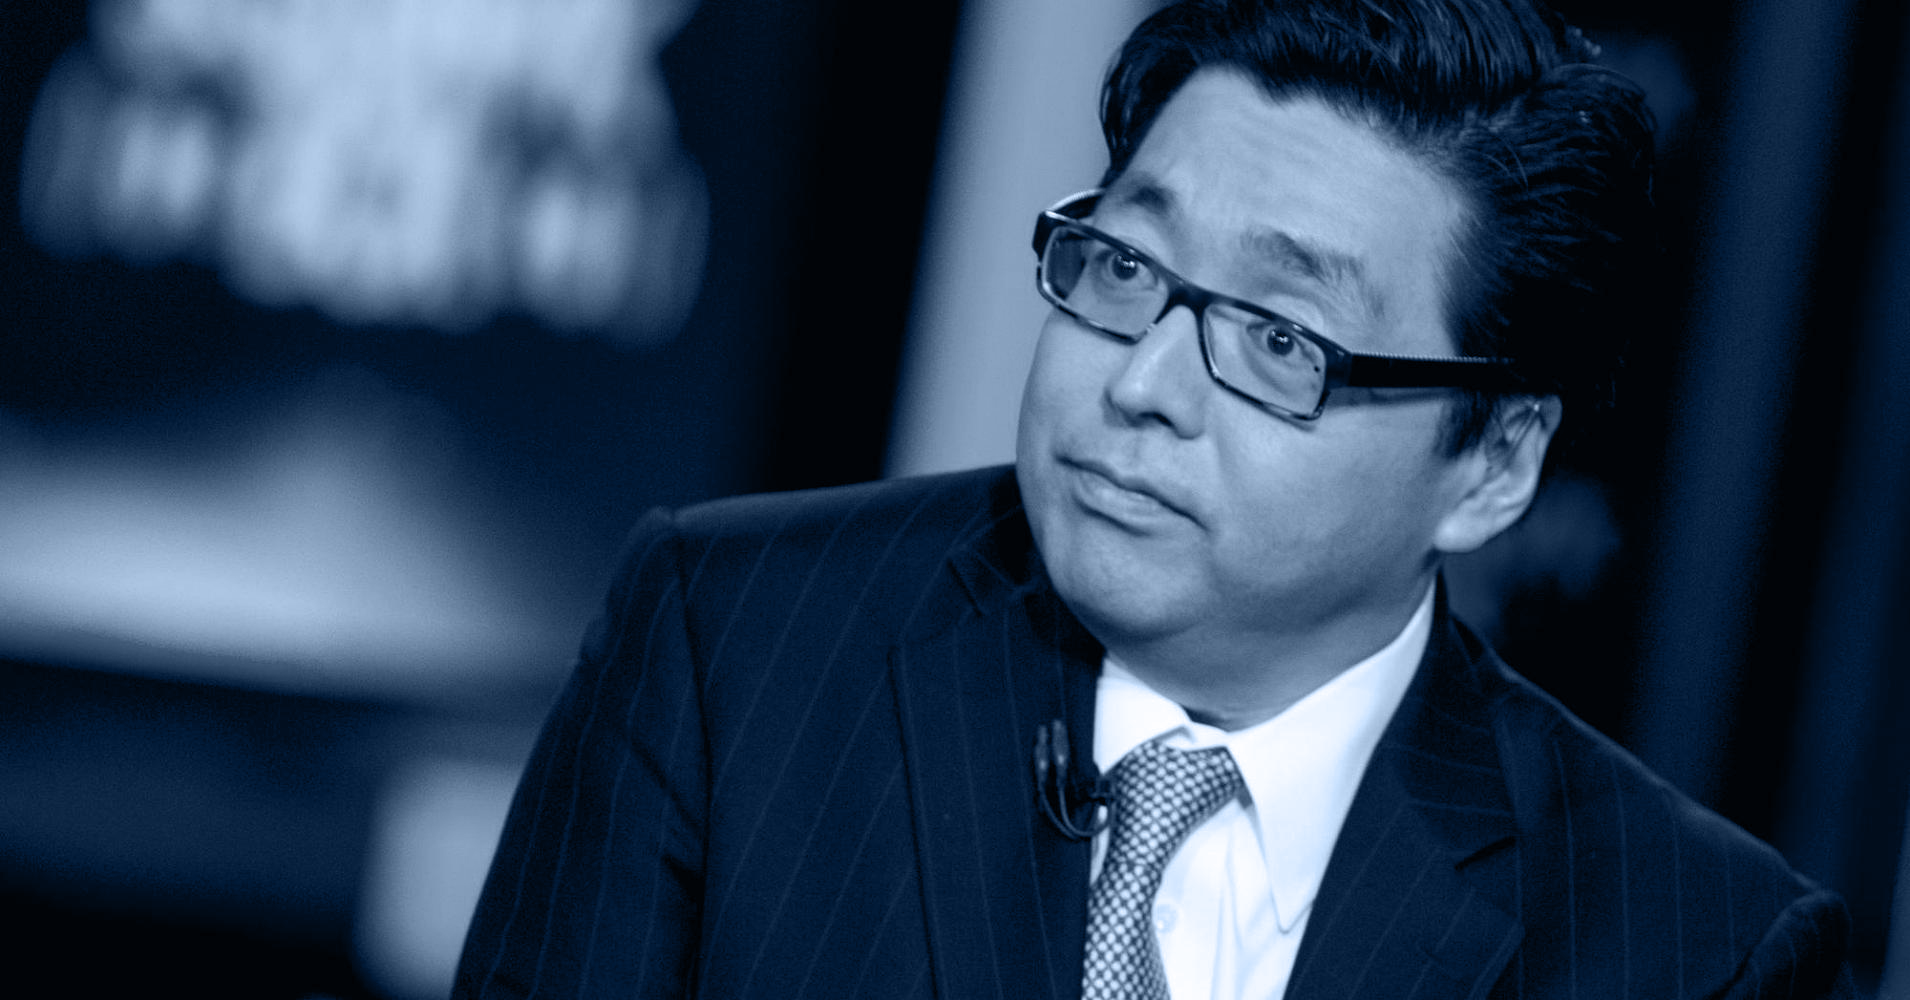 It’s Good Time To Buy Cryptocurrency: Fundstrat’s Strategist Tom Lee